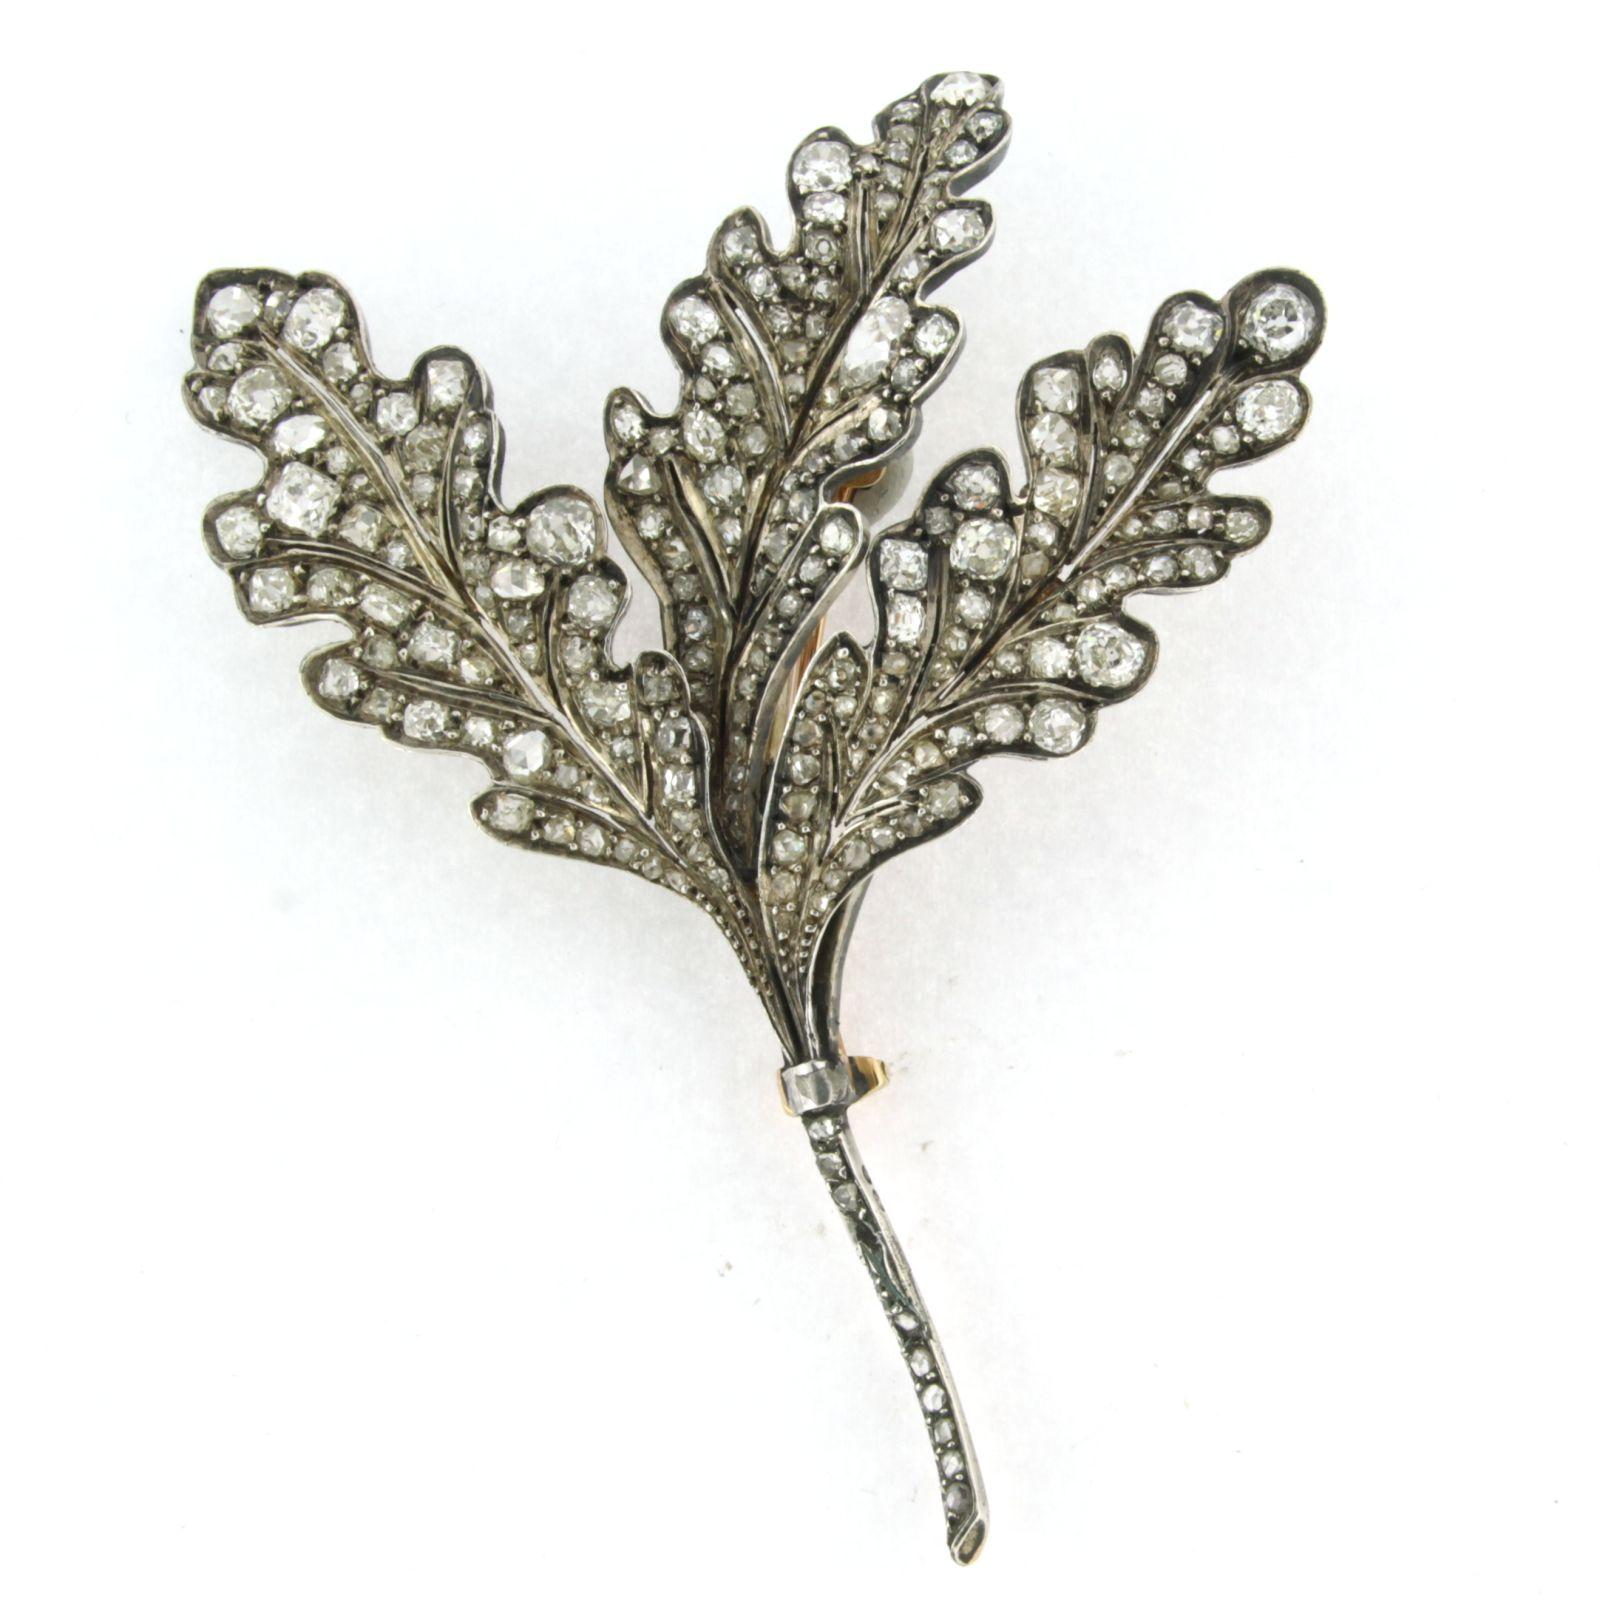 18k yellow gold with silver branch brooch set with old mine cut and rose cut diamonds. 8.00ct - G/H - VS/SI - size 8.5 cm by 6.4 cm wide

detailed description:

The size of the brooch is approximately 8.5 cm by 6.4 cm wide

weight: 25.1 grams

put